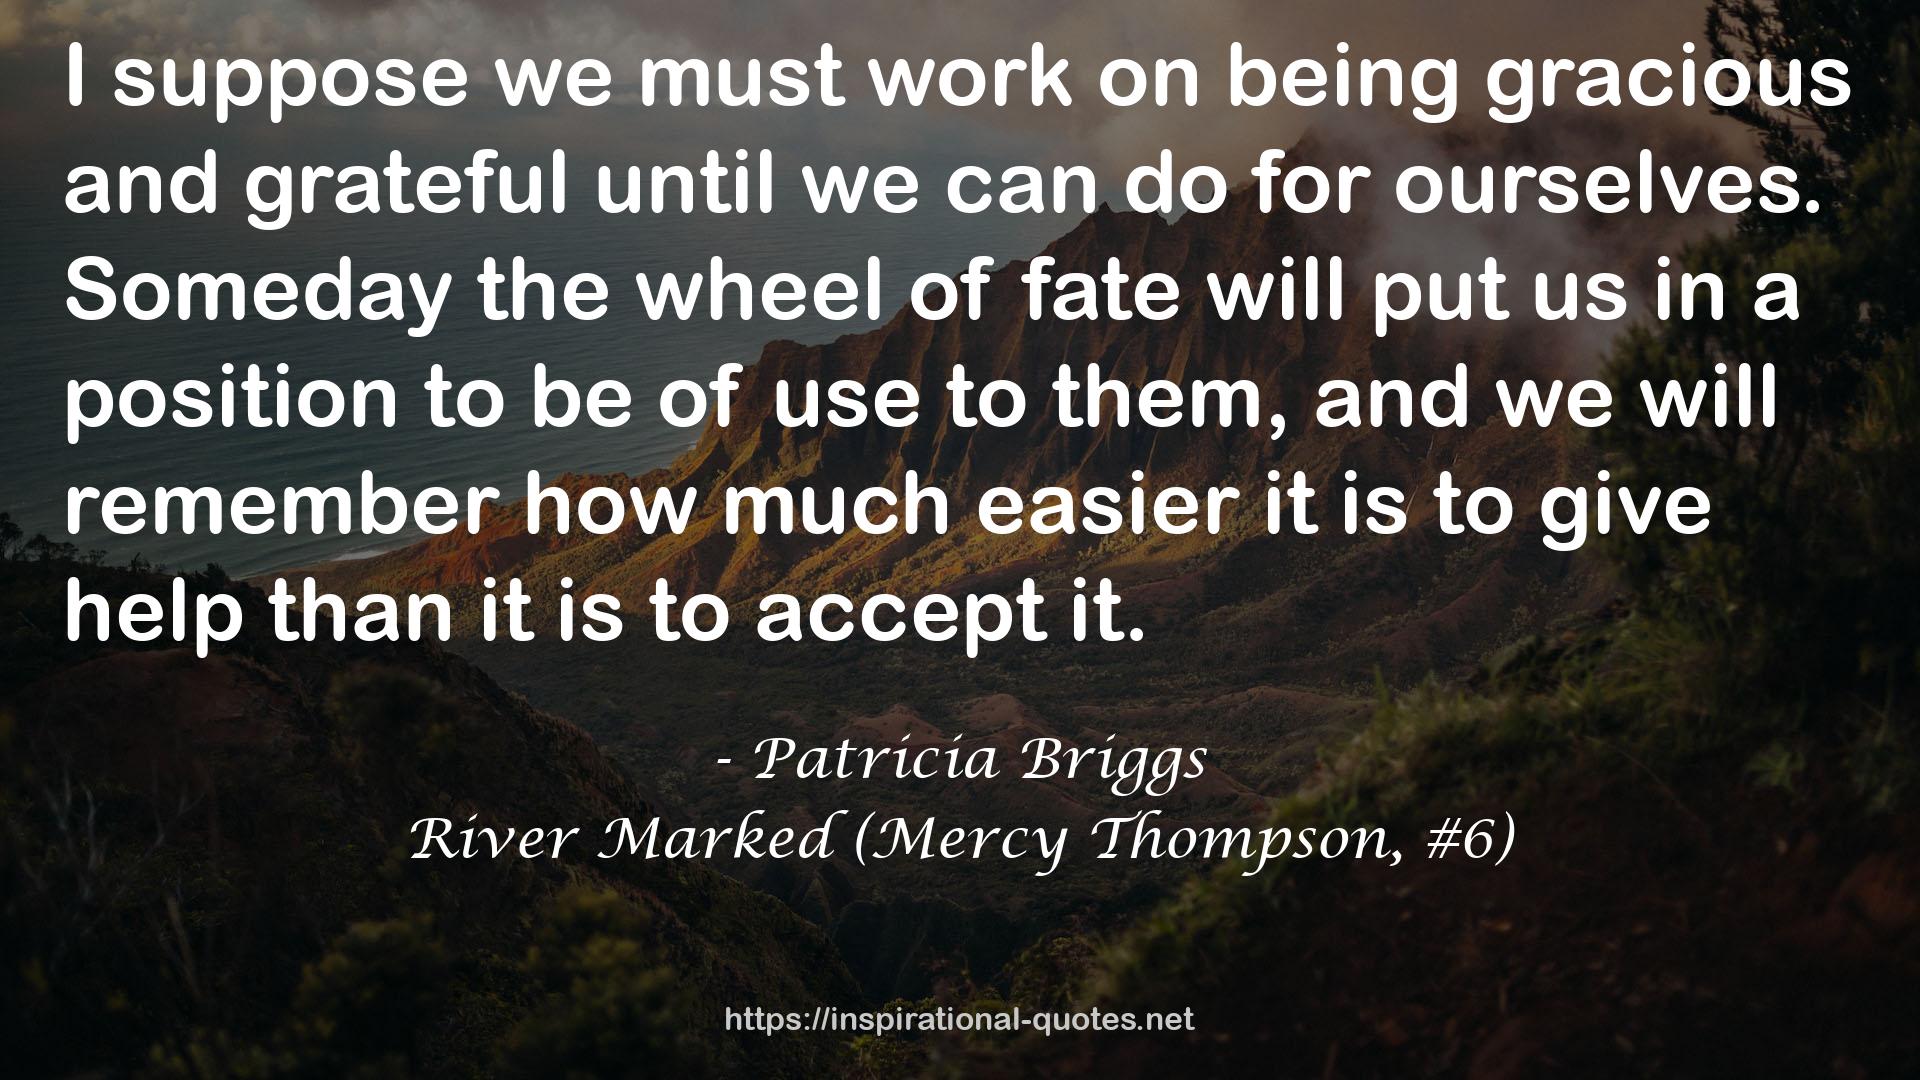 River Marked (Mercy Thompson, #6) QUOTES